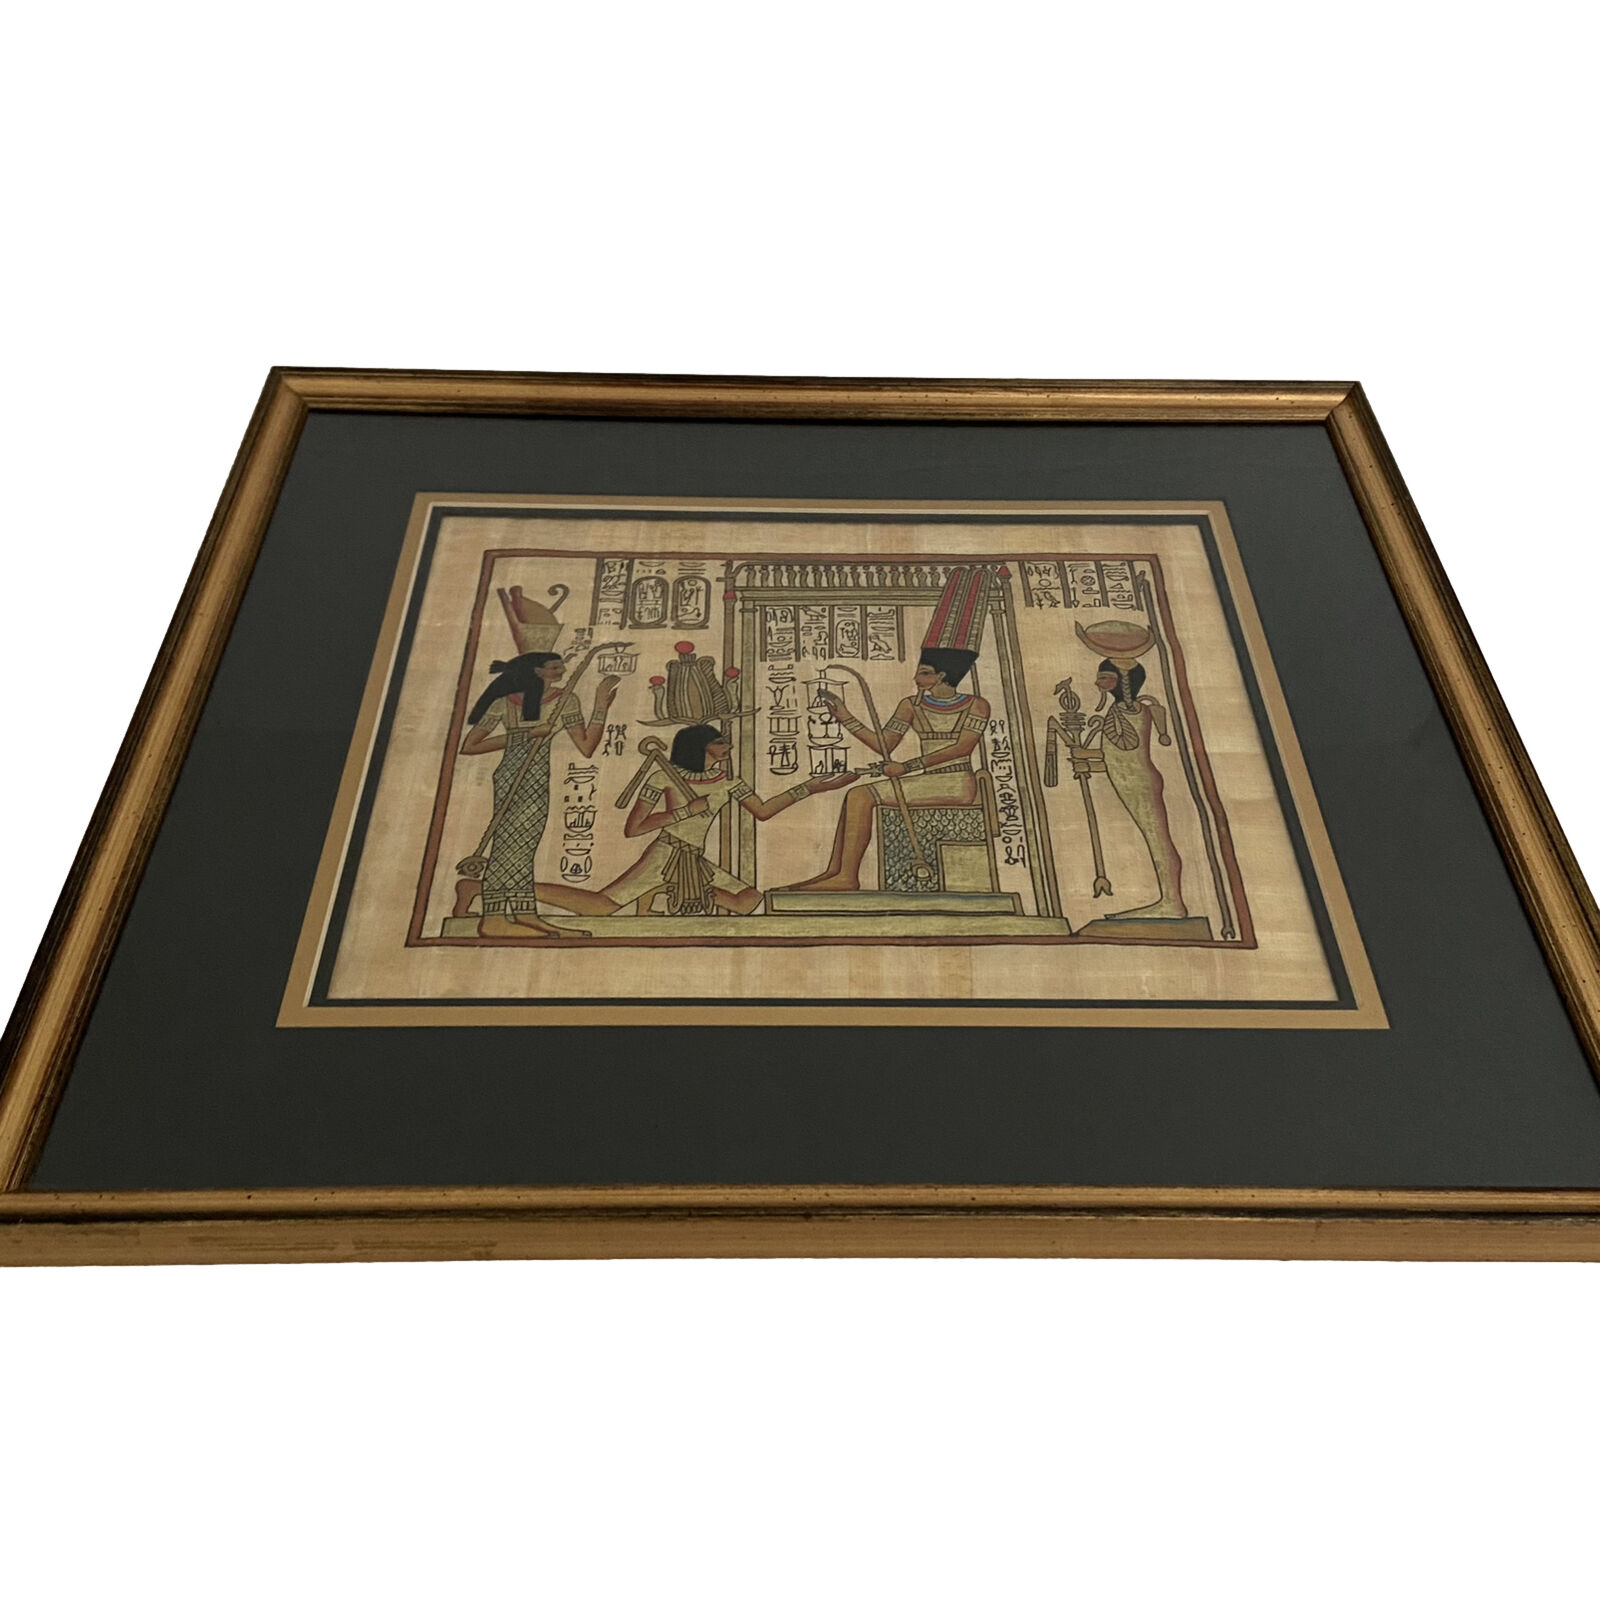 Egyptian Hand Painting On Papyrus Artwork Professionally Matted Framed 